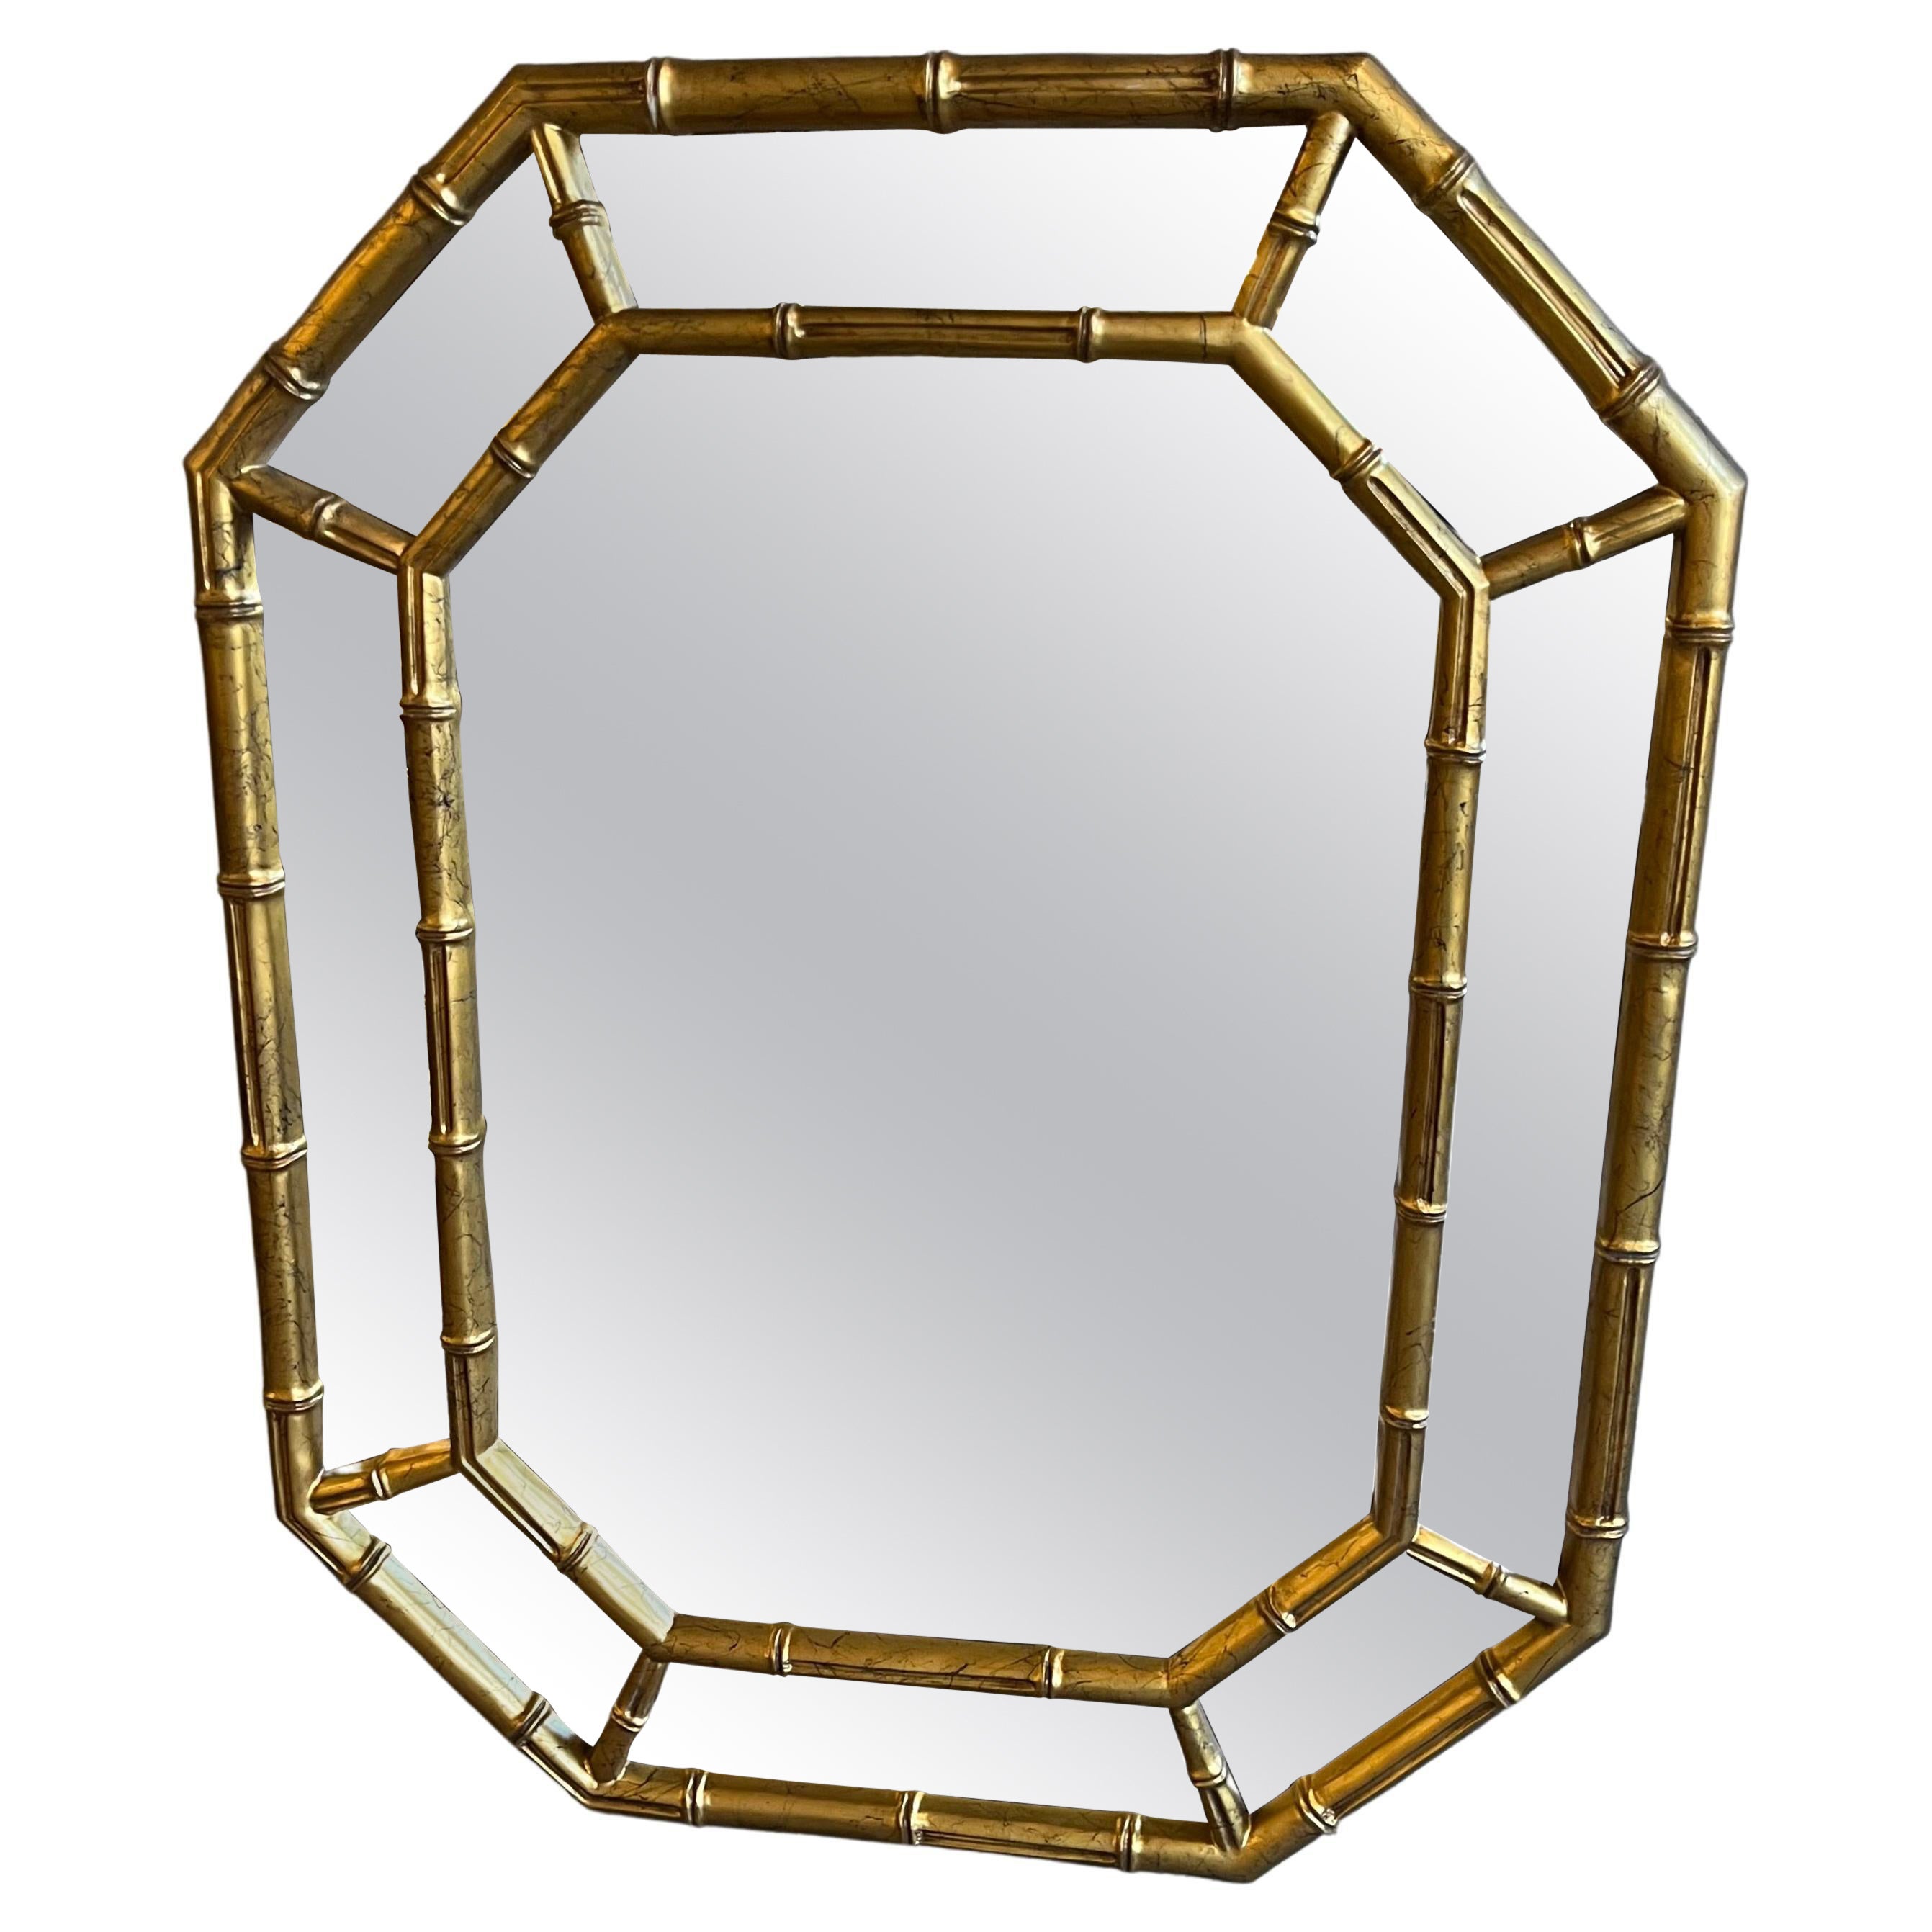 1960s Gilt Faux Bamboo Wood Octagonal Wall Mirror with Black Painted Veining